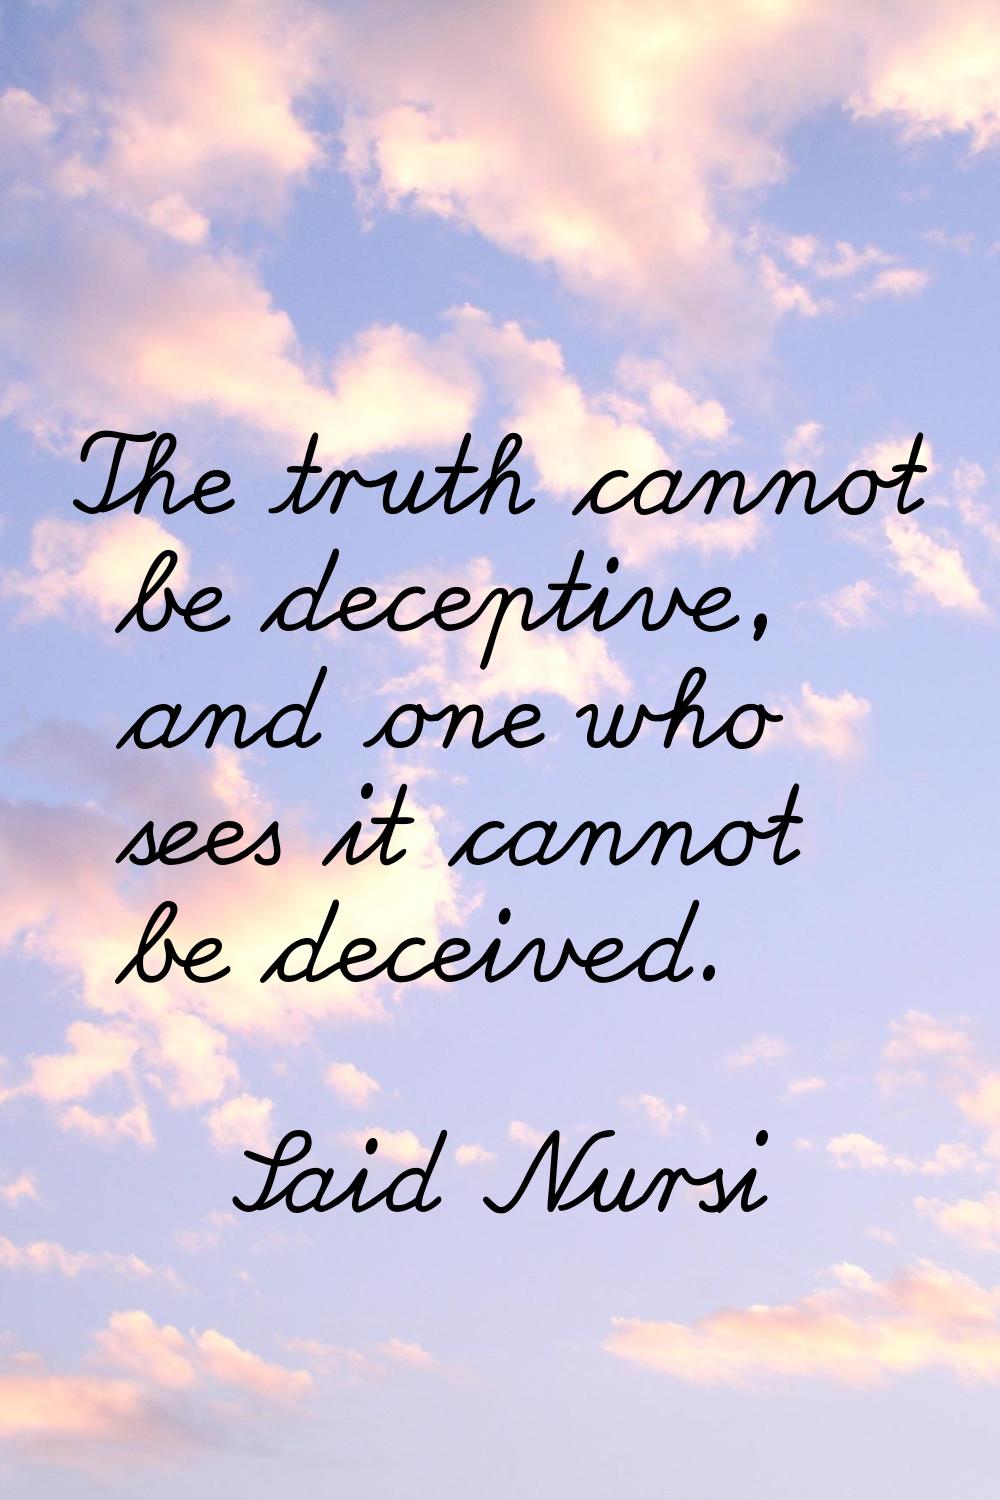 The truth cannot be deceptive, and one who sees it cannot be deceived.